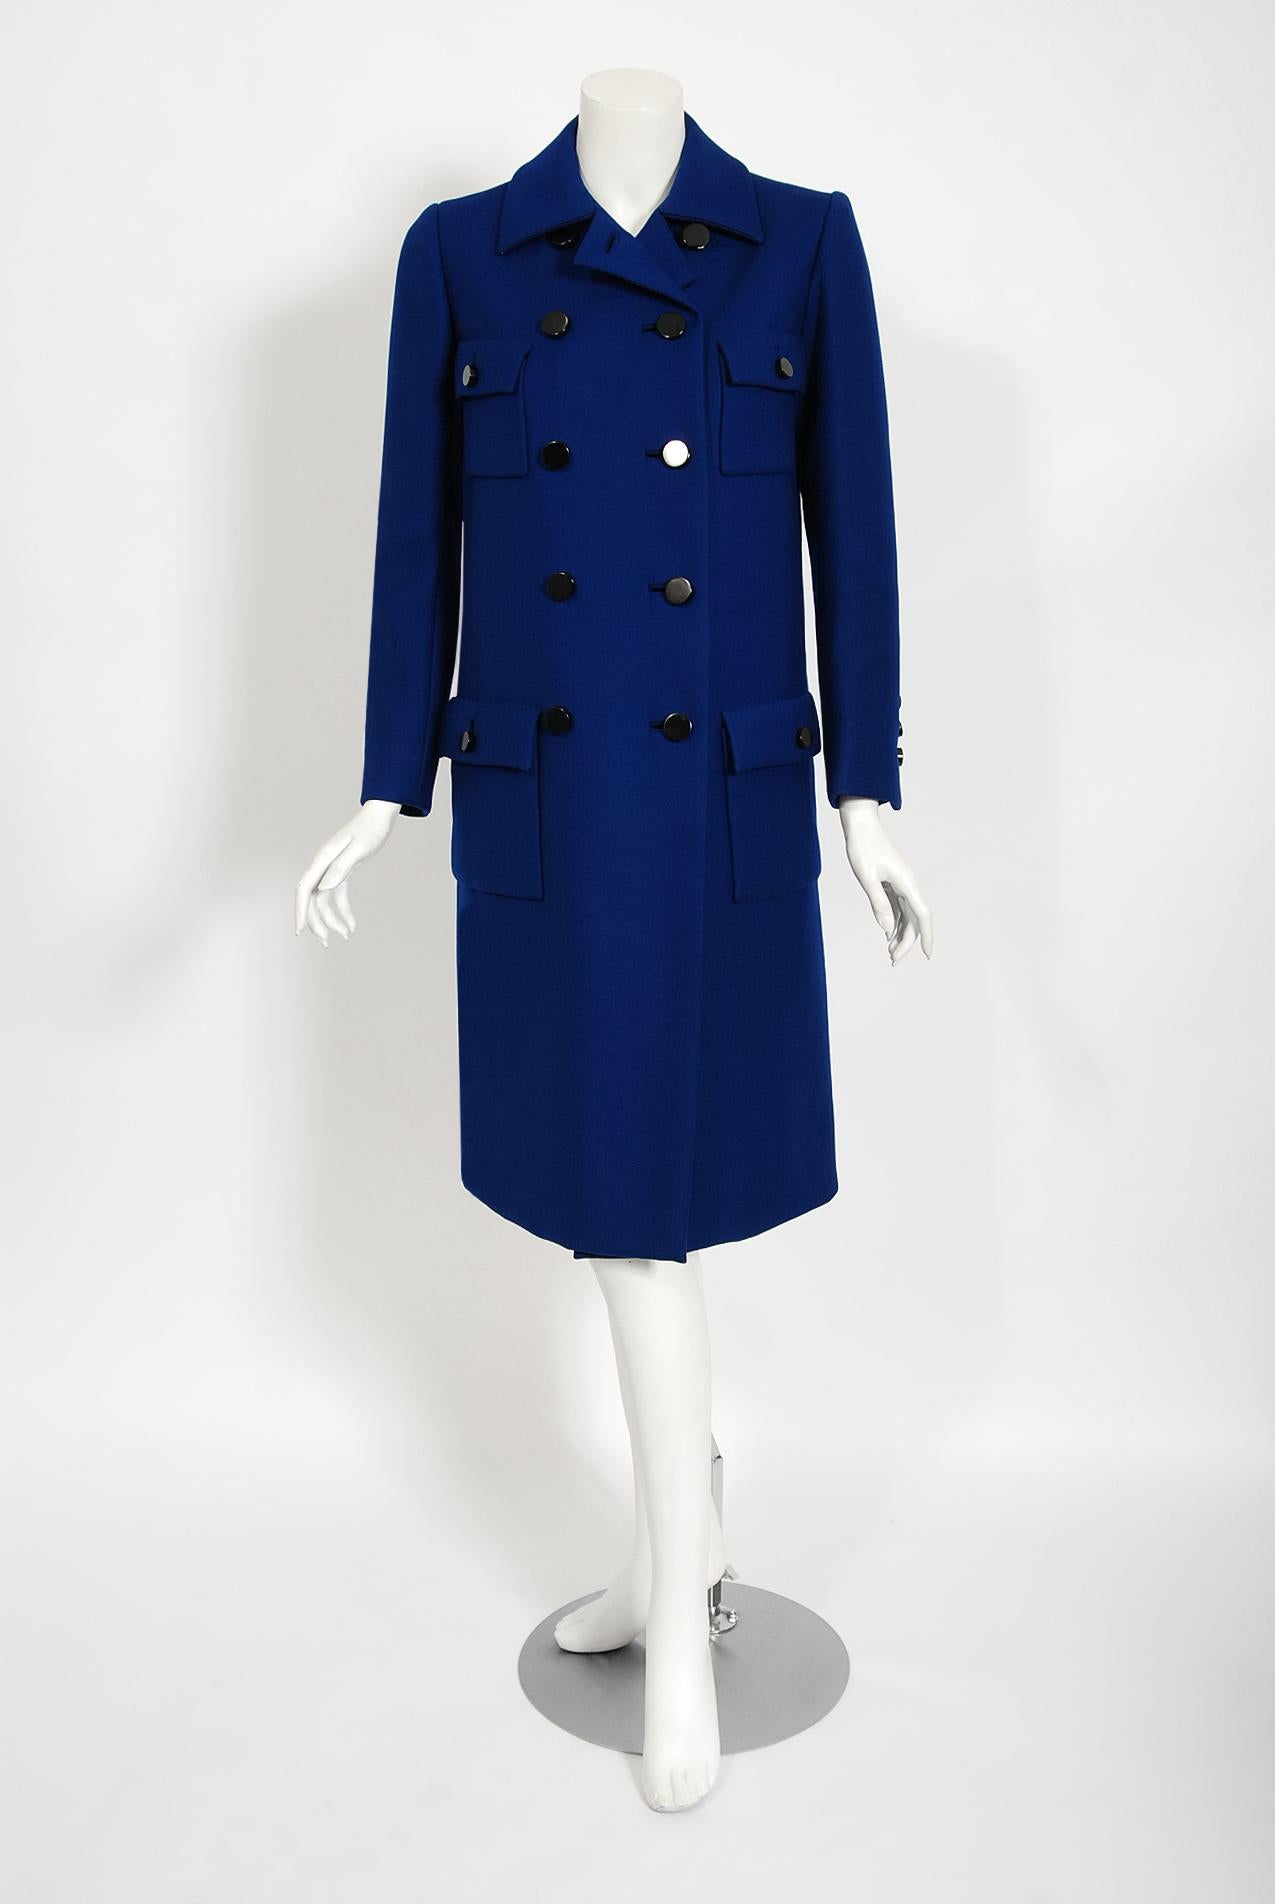 This timeless Norman Norell coat, in the chicest royal blue color, exemplifies his signature blend of couture level quality with quintessentially American style. This gorgeous garment, dating back to his 1969-70 fall winter collection, has the most